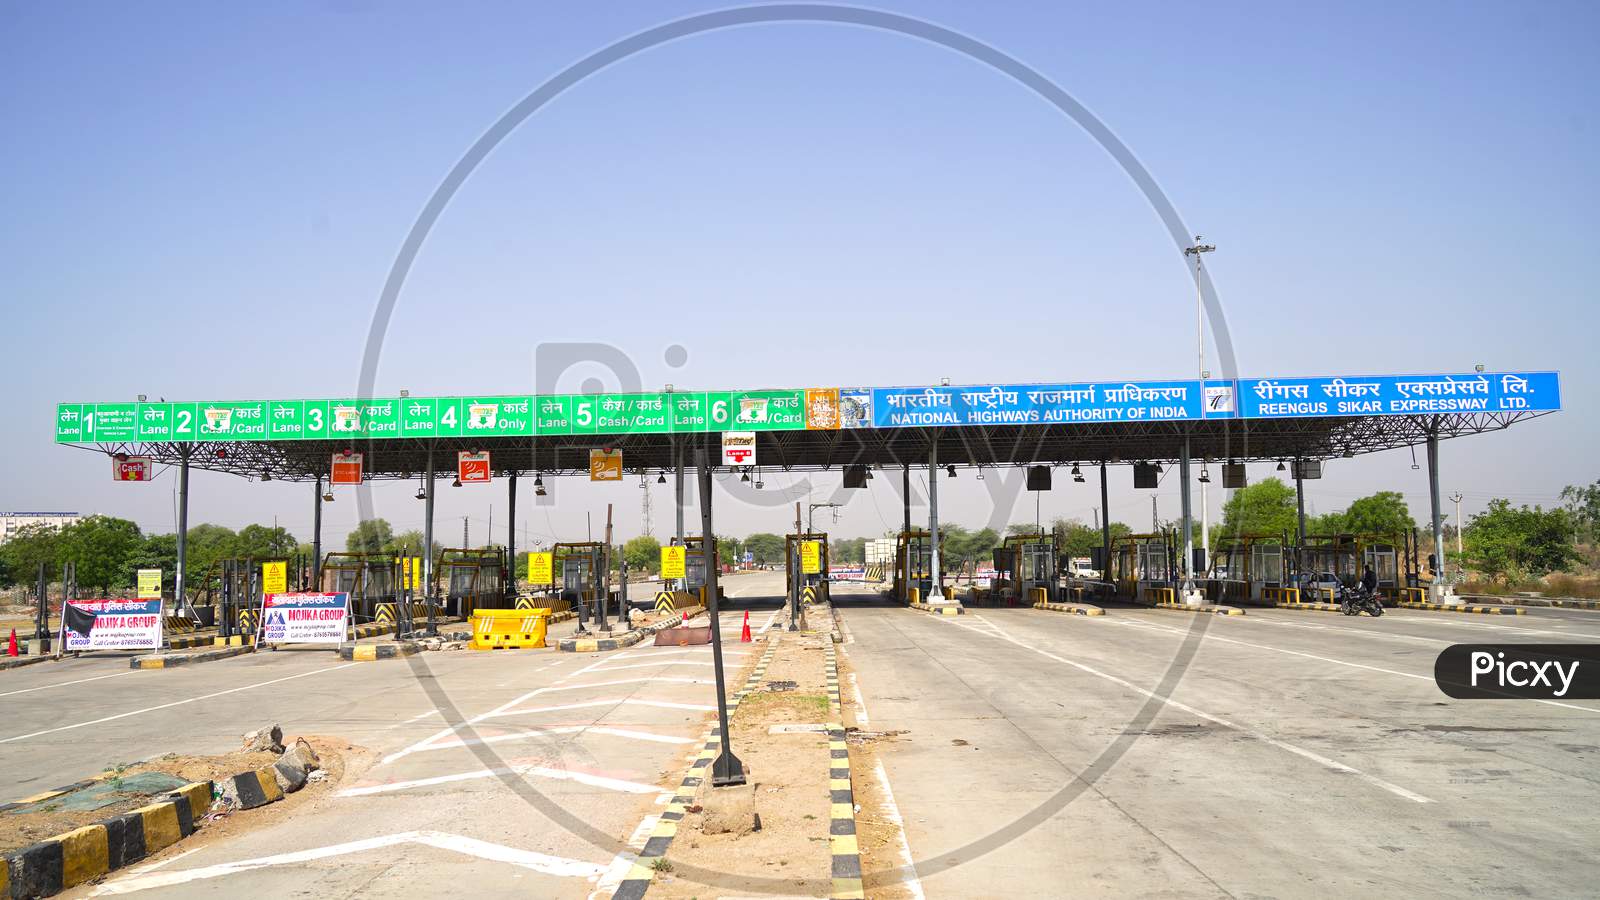 Picture Of Toll Plaza On A National Highway Operated By Nhai (National Highways Authority Of India)